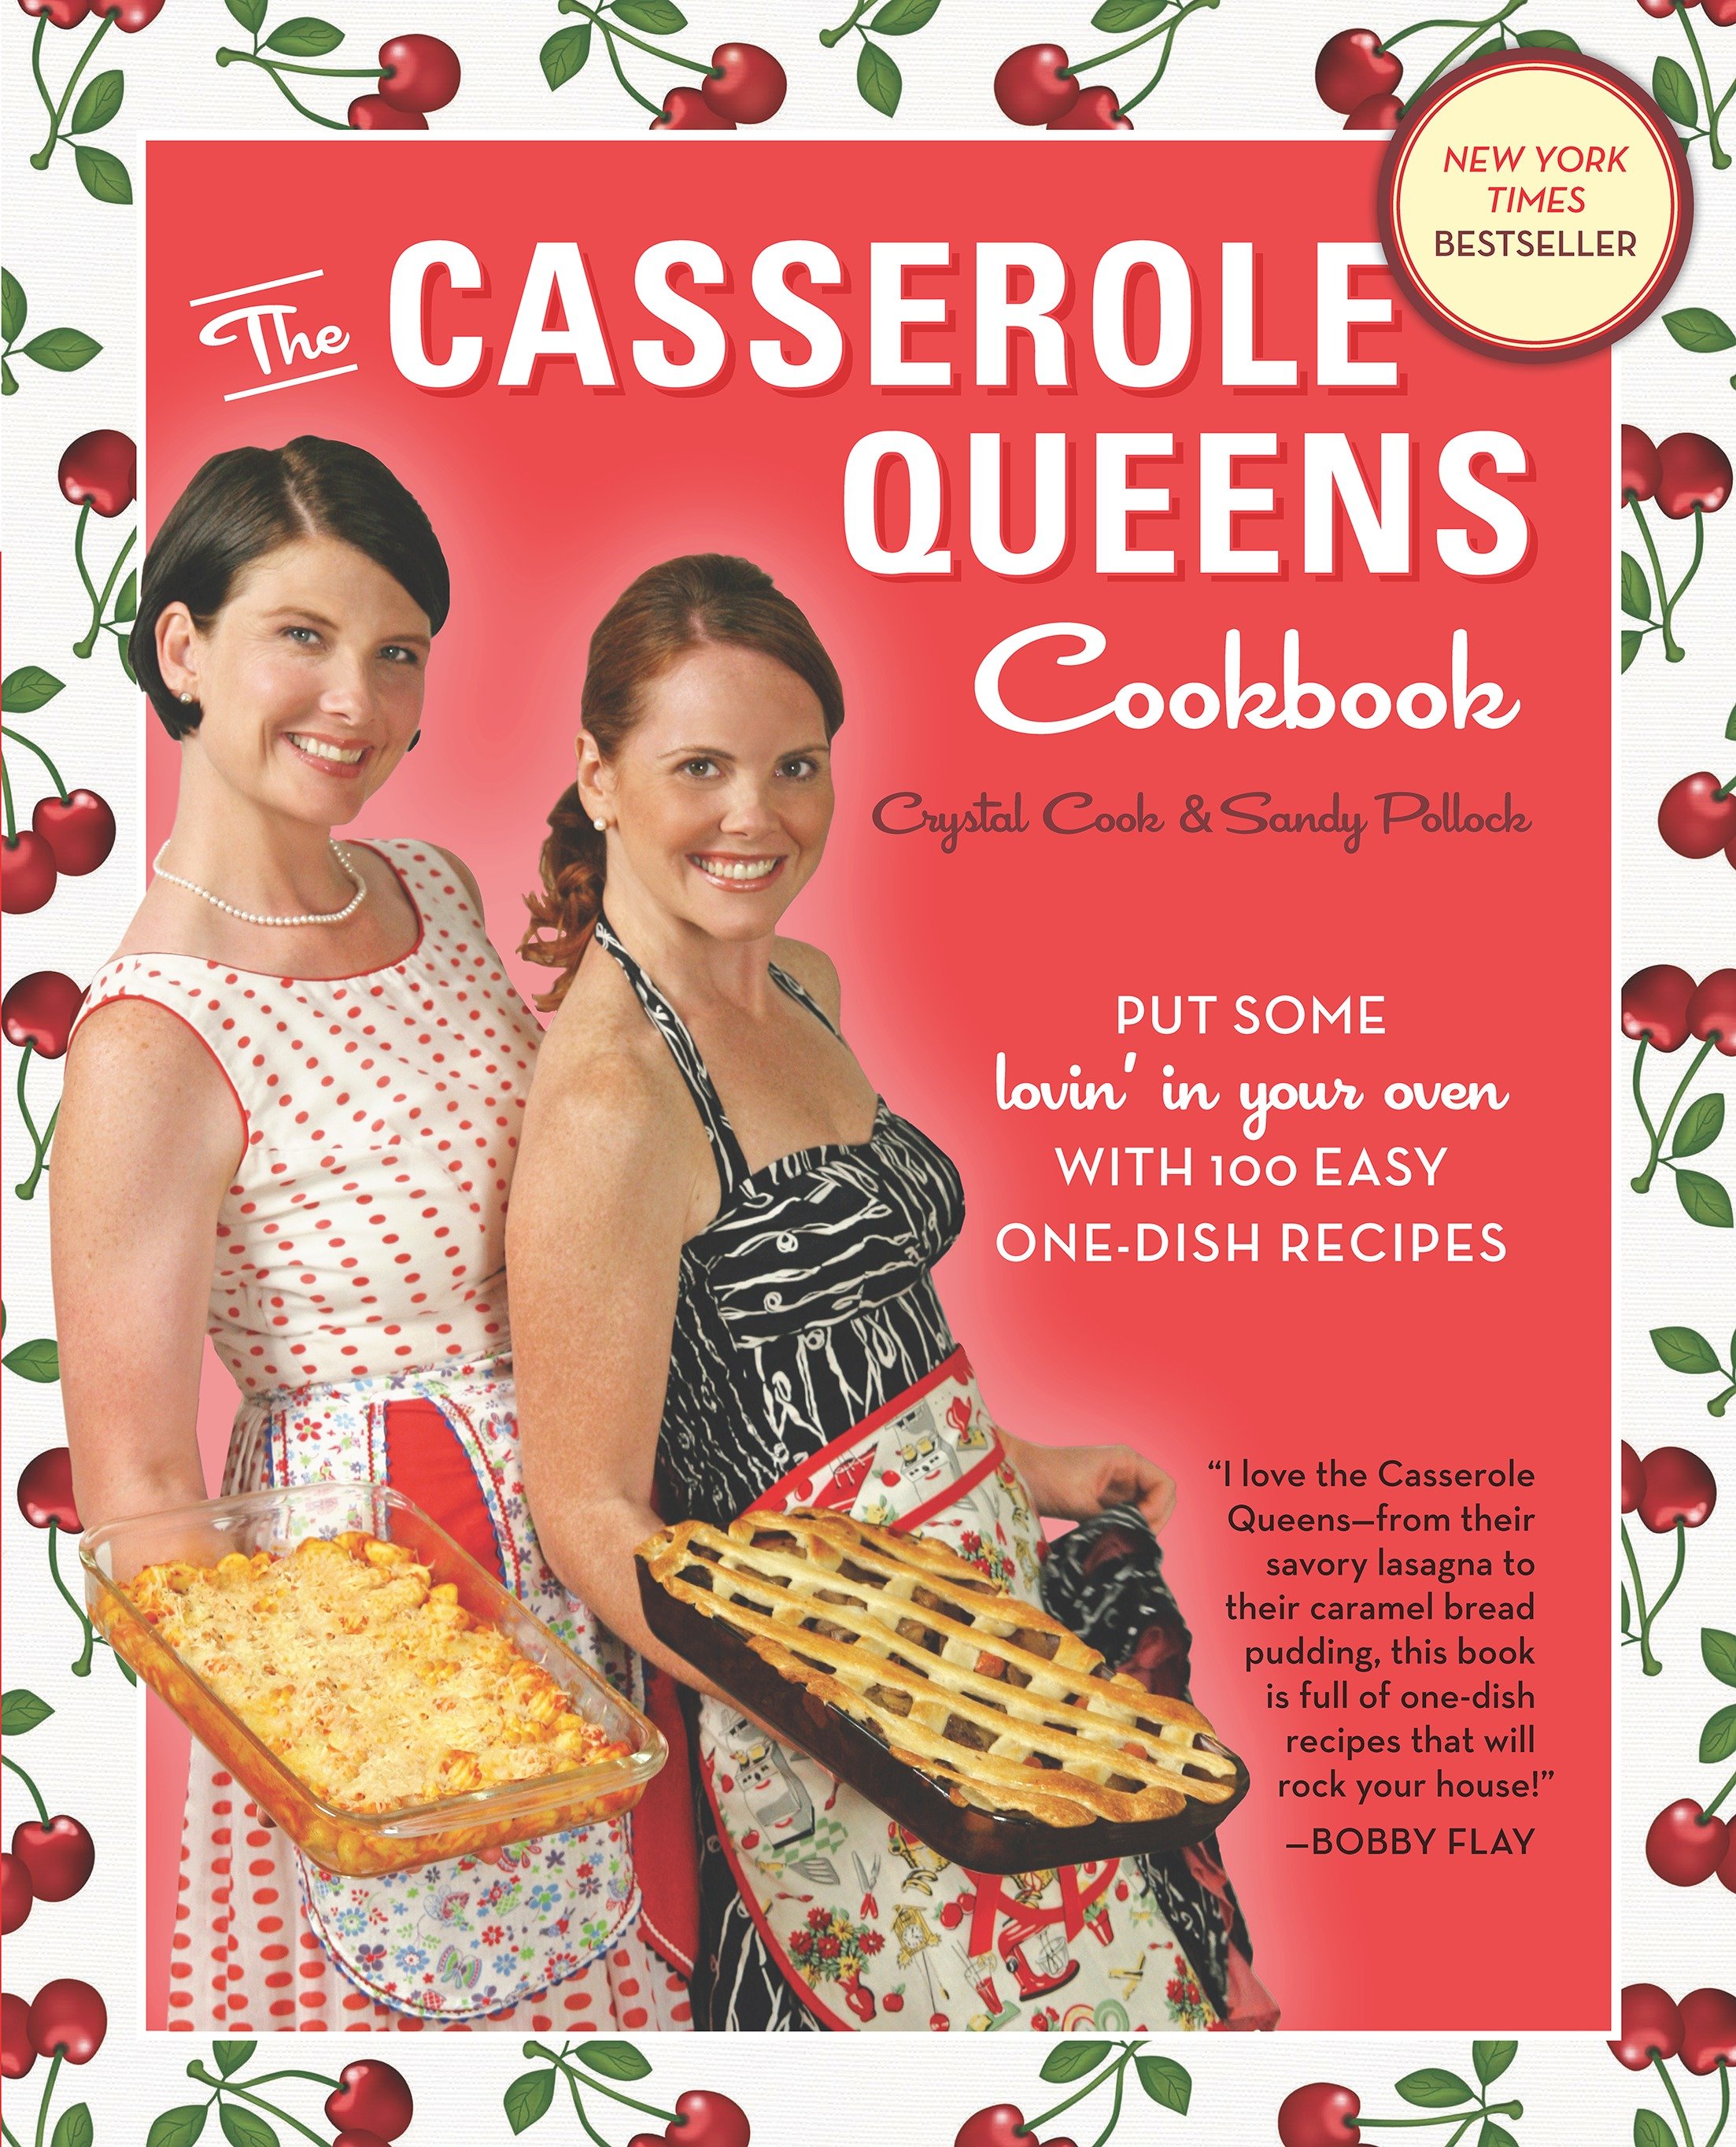 The casserole queens cookbook put some lovin' in your oven with 100 easy one-dish recipes cover image